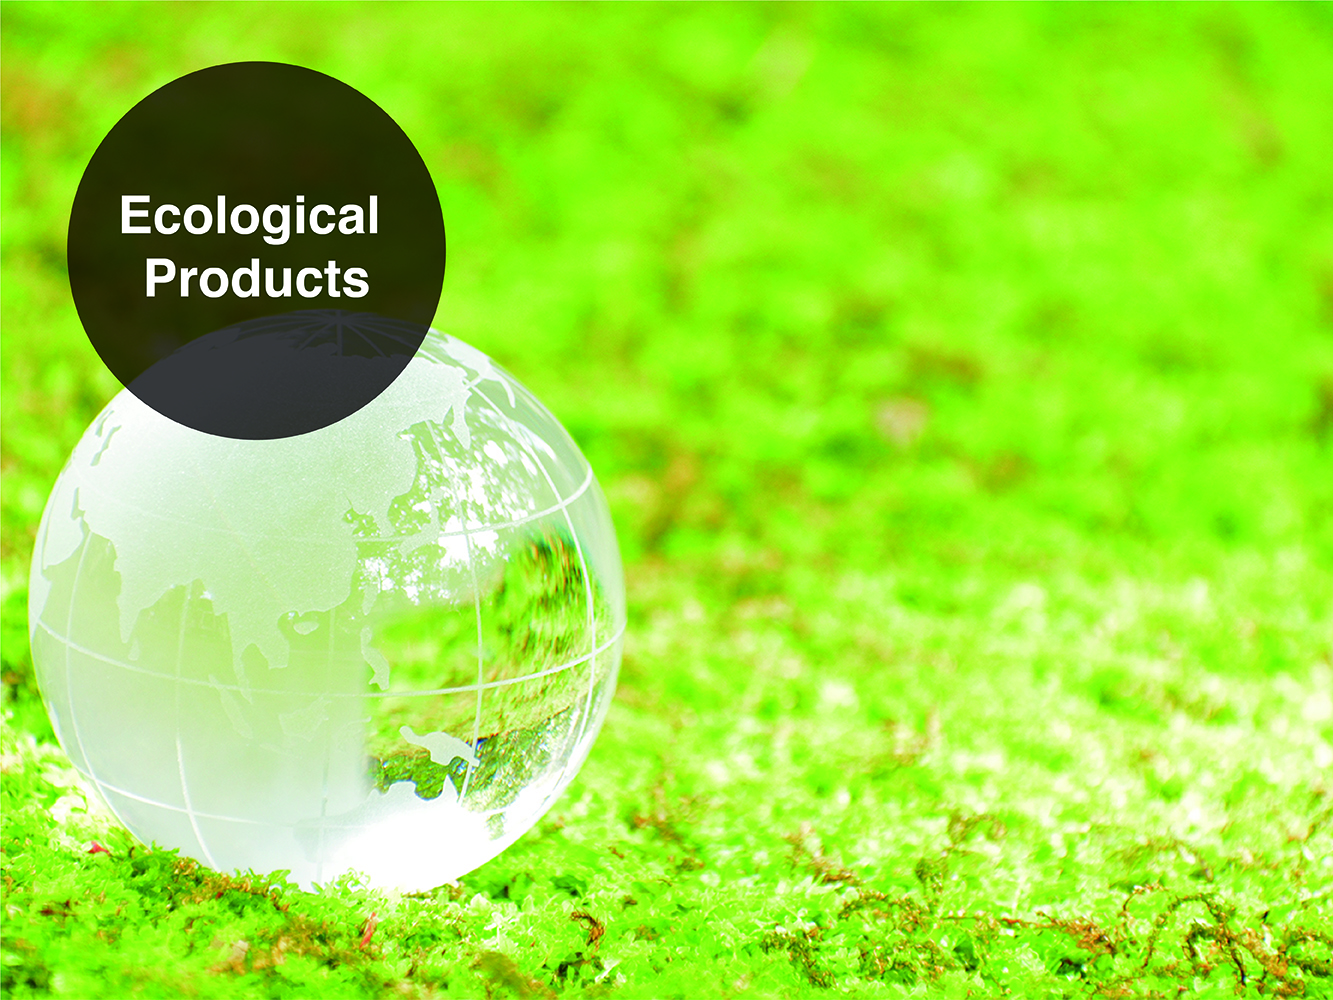 Ecological Products